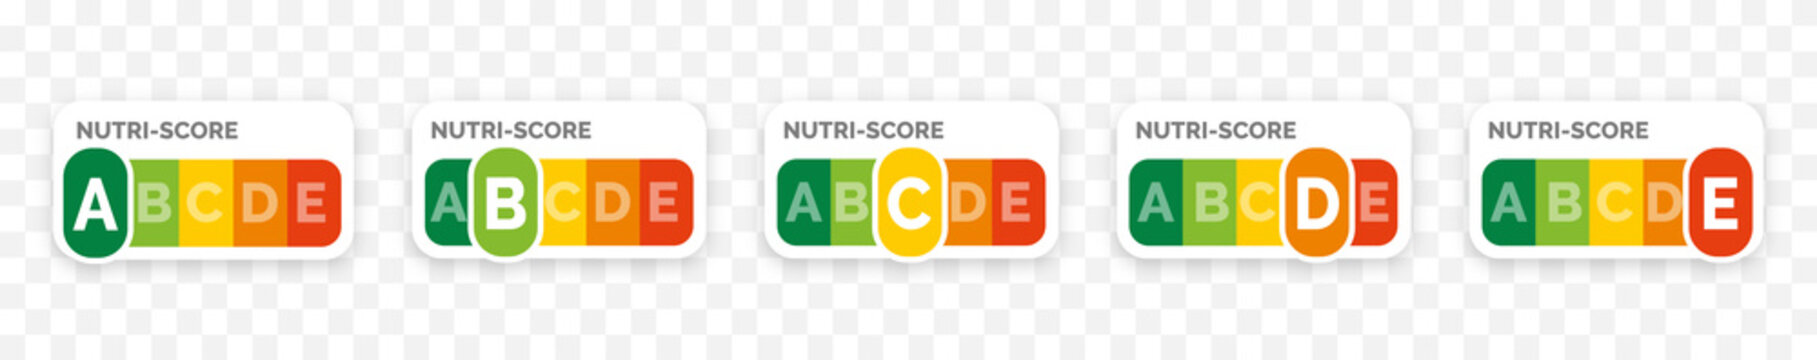 Nutri-score icons set. Isolatad Nutriscore stickers for packaging on white background. Food rating system signs : A, B, C, D, E. Vector illustration.